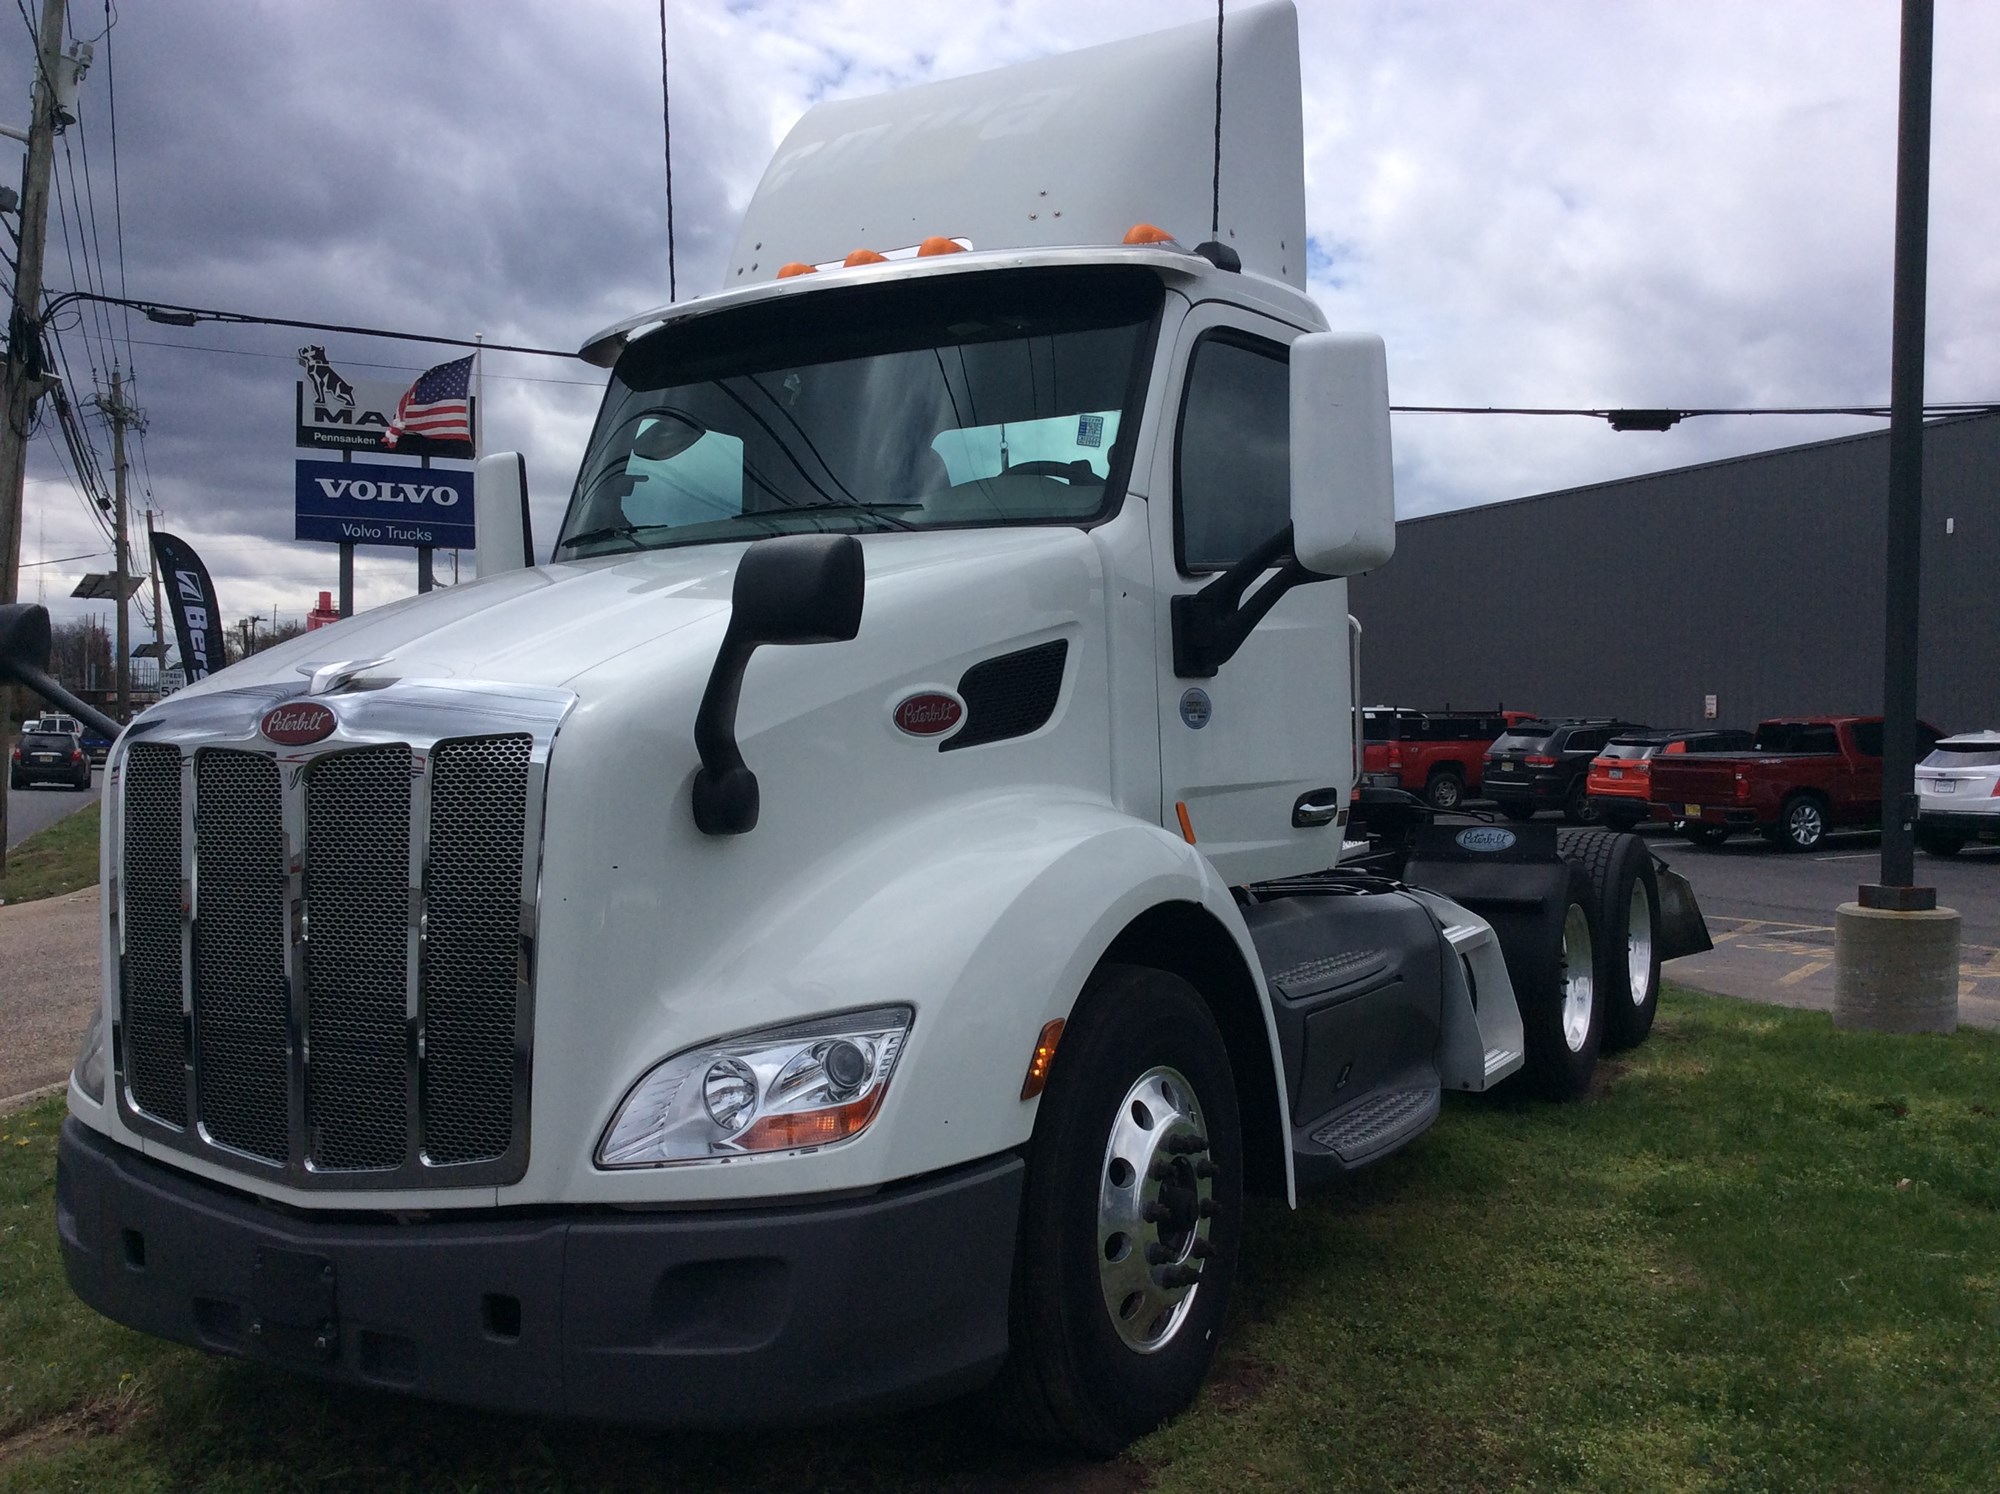 Used Truck Inventory - 1000878 01 - 41